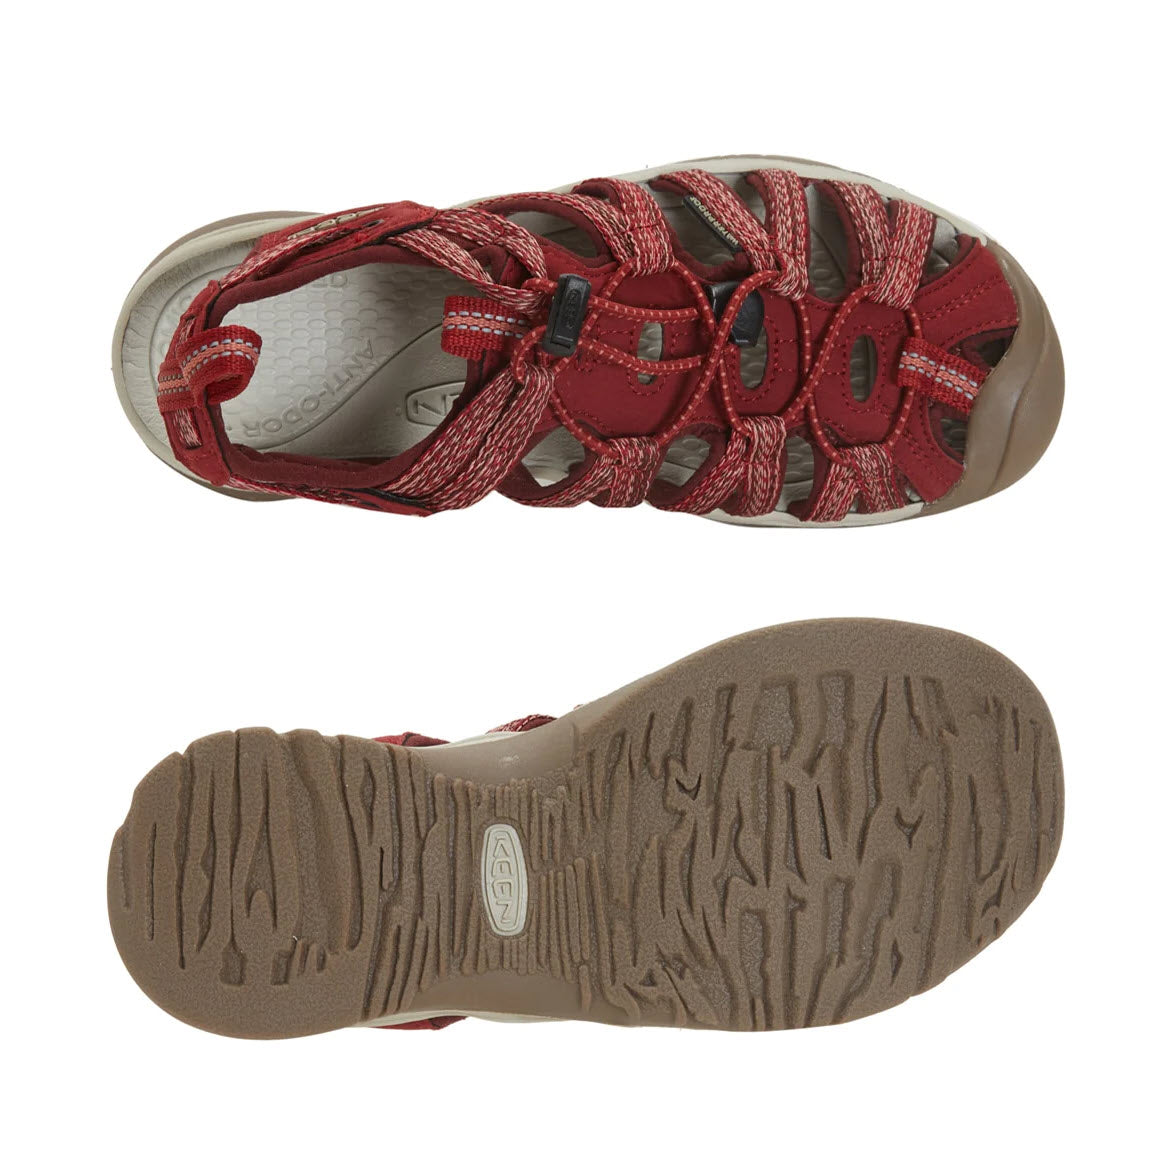 Top and bottom views of a Keen Whisper Red Dahlia - Womens sport sandal designed for maximum comfort, featuring a gray insole and detailed brown rubber sole.